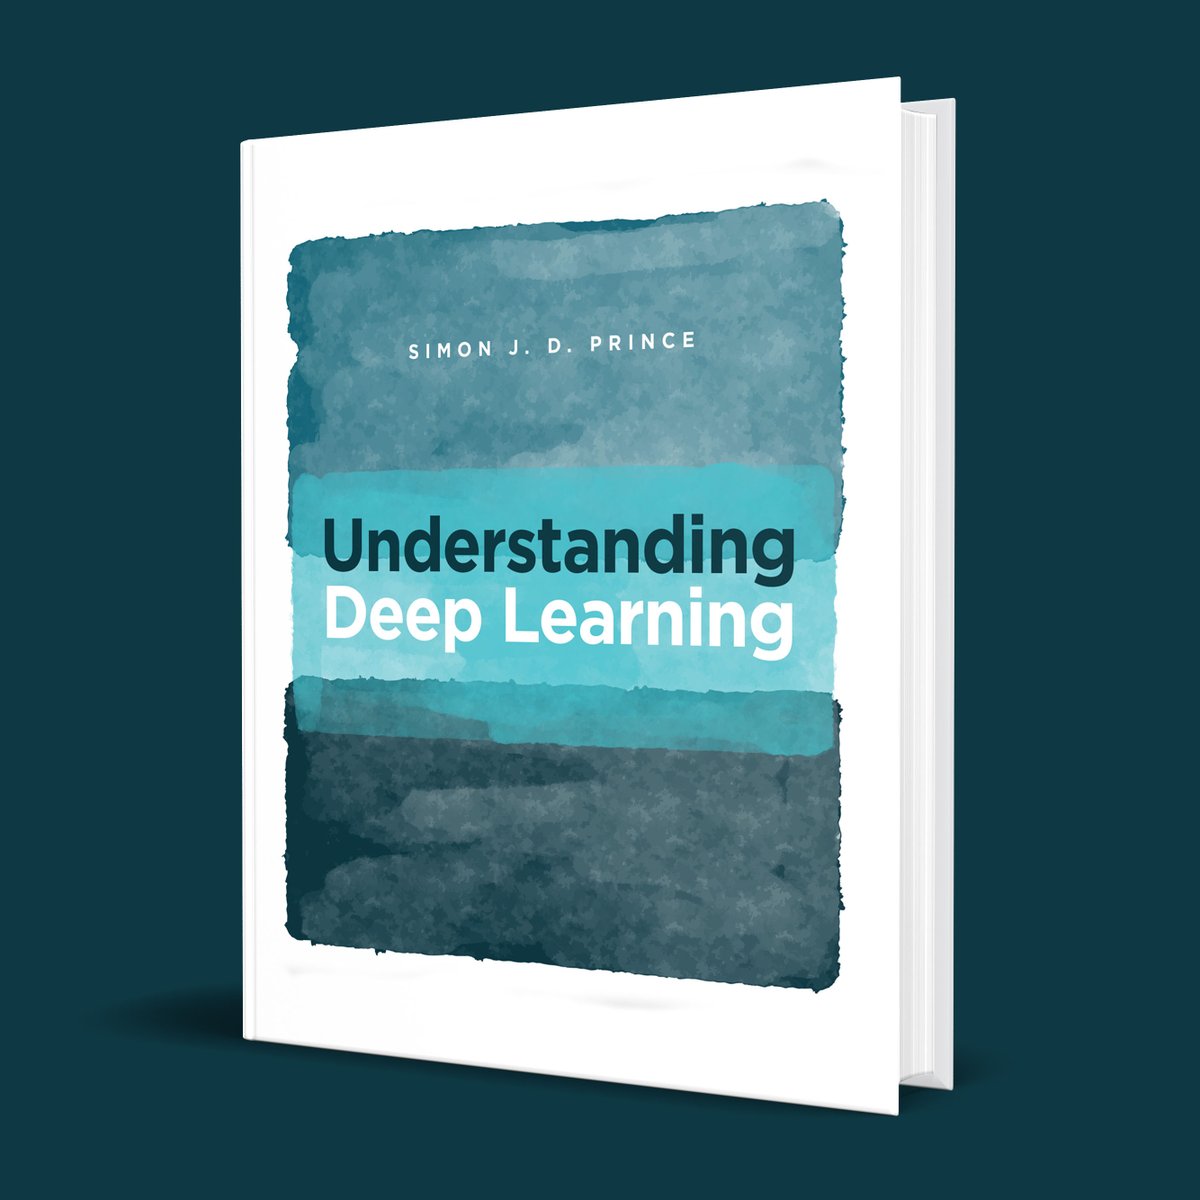 Just a reminder that if you live in the US, you can get 20% off the list price of Understanding Deep Learning until December 31st at: penguinrandomhouse.com/books/730887/u… Use the code 'December20'to get the discount.